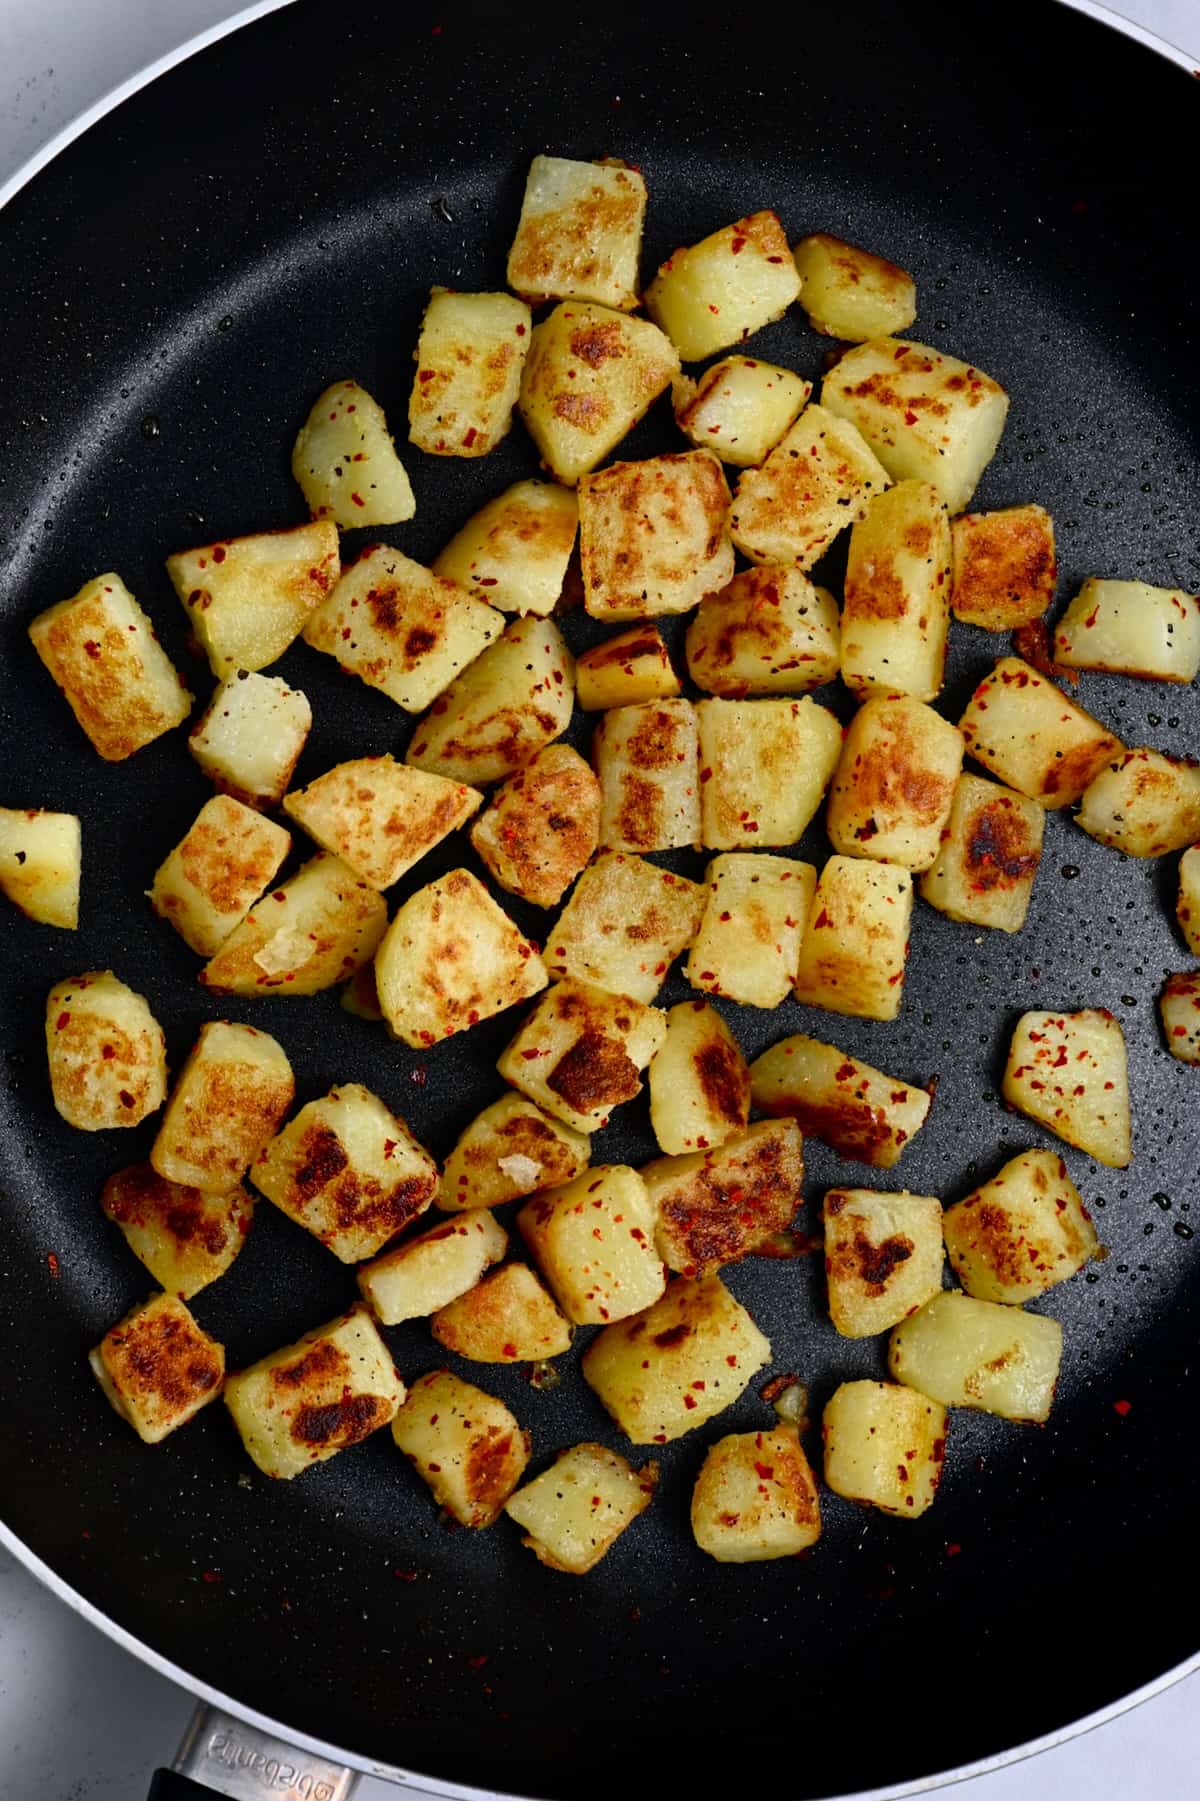 Pan fried potatoes in a skilled